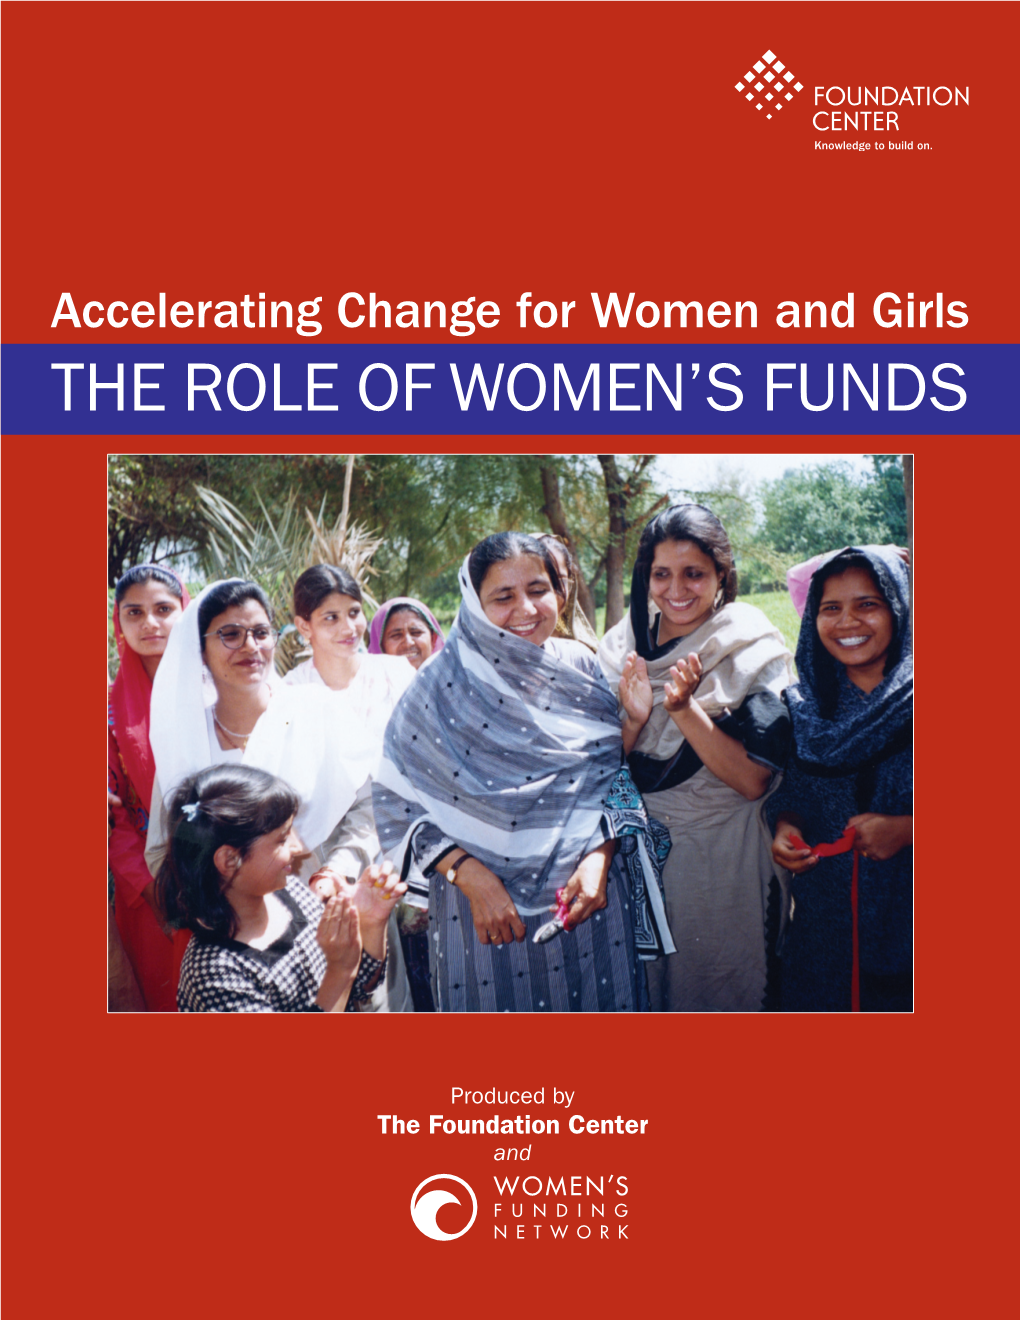 The Role of Women's Funds